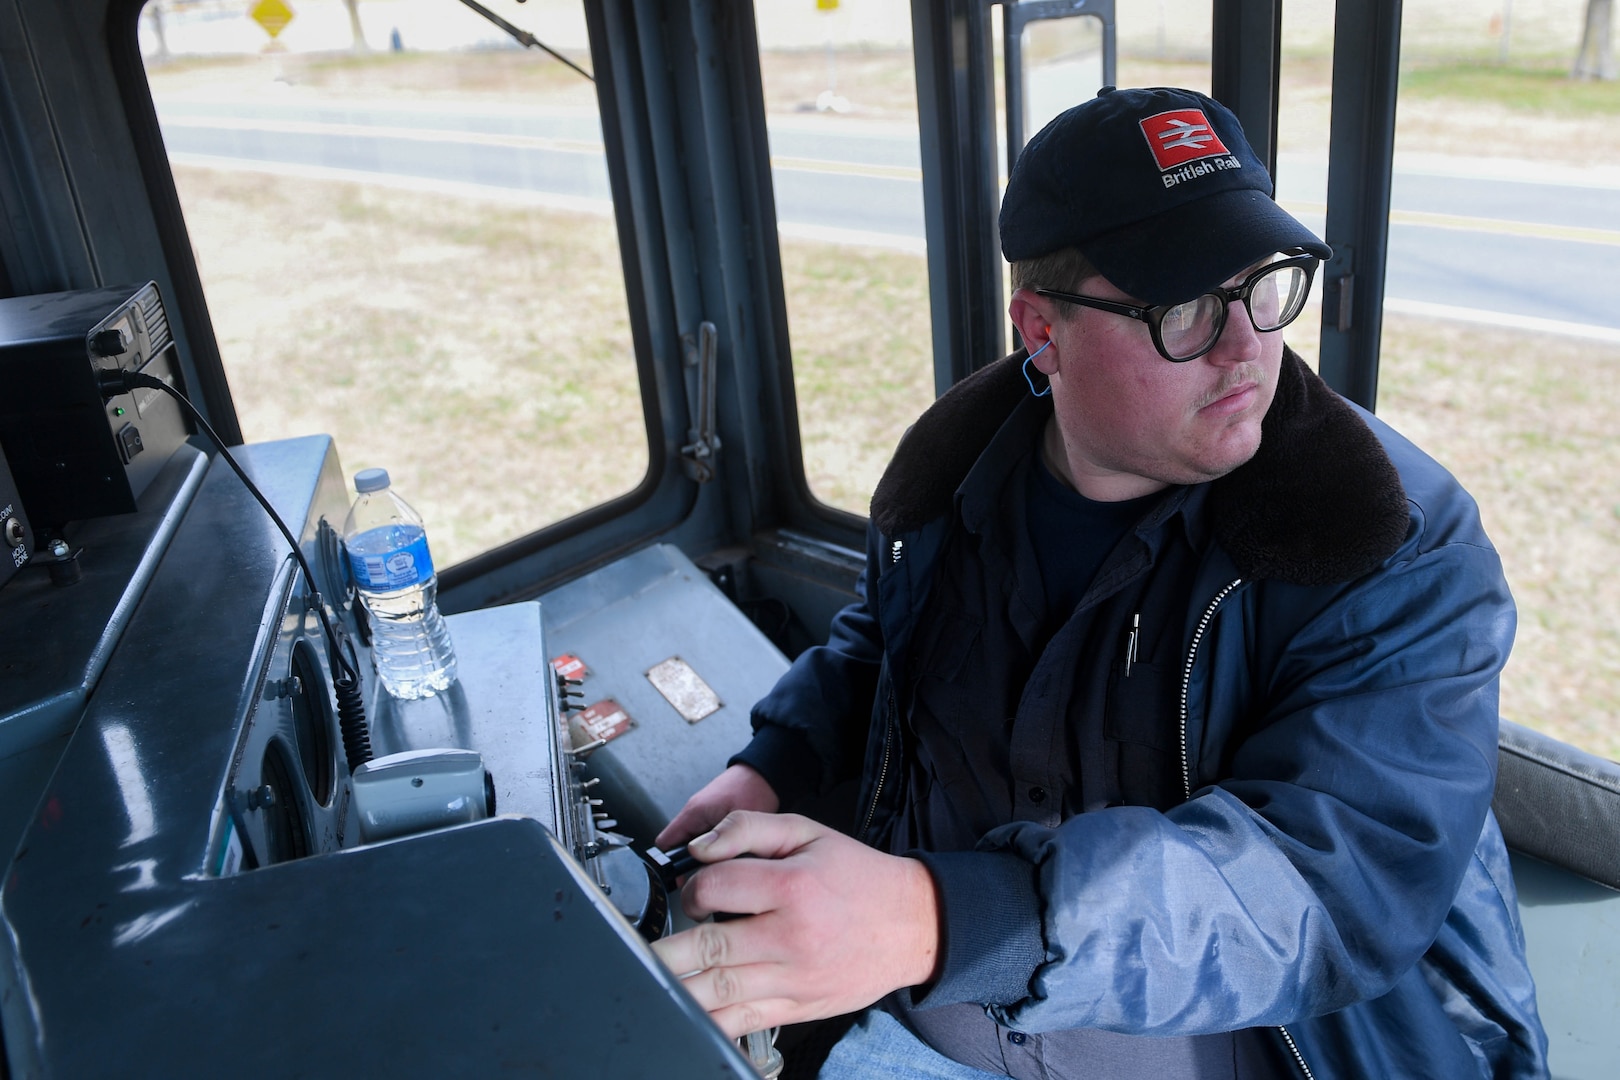 William Grimes, 733rd Logistics Readiness Squadron, Transportation section, utility rail branch locomotive engineer, steers a railcar at Joint Base Langley-Eustis, Virginia, Feb. 15, 2019. The JBLE utility shop plays an integral role in Joint Logistical over the Sea operations where causeways, vehicles and equipment can easily be transported across the nation.(U.S. Air Force photo by Senior Airman Derek Seifert)